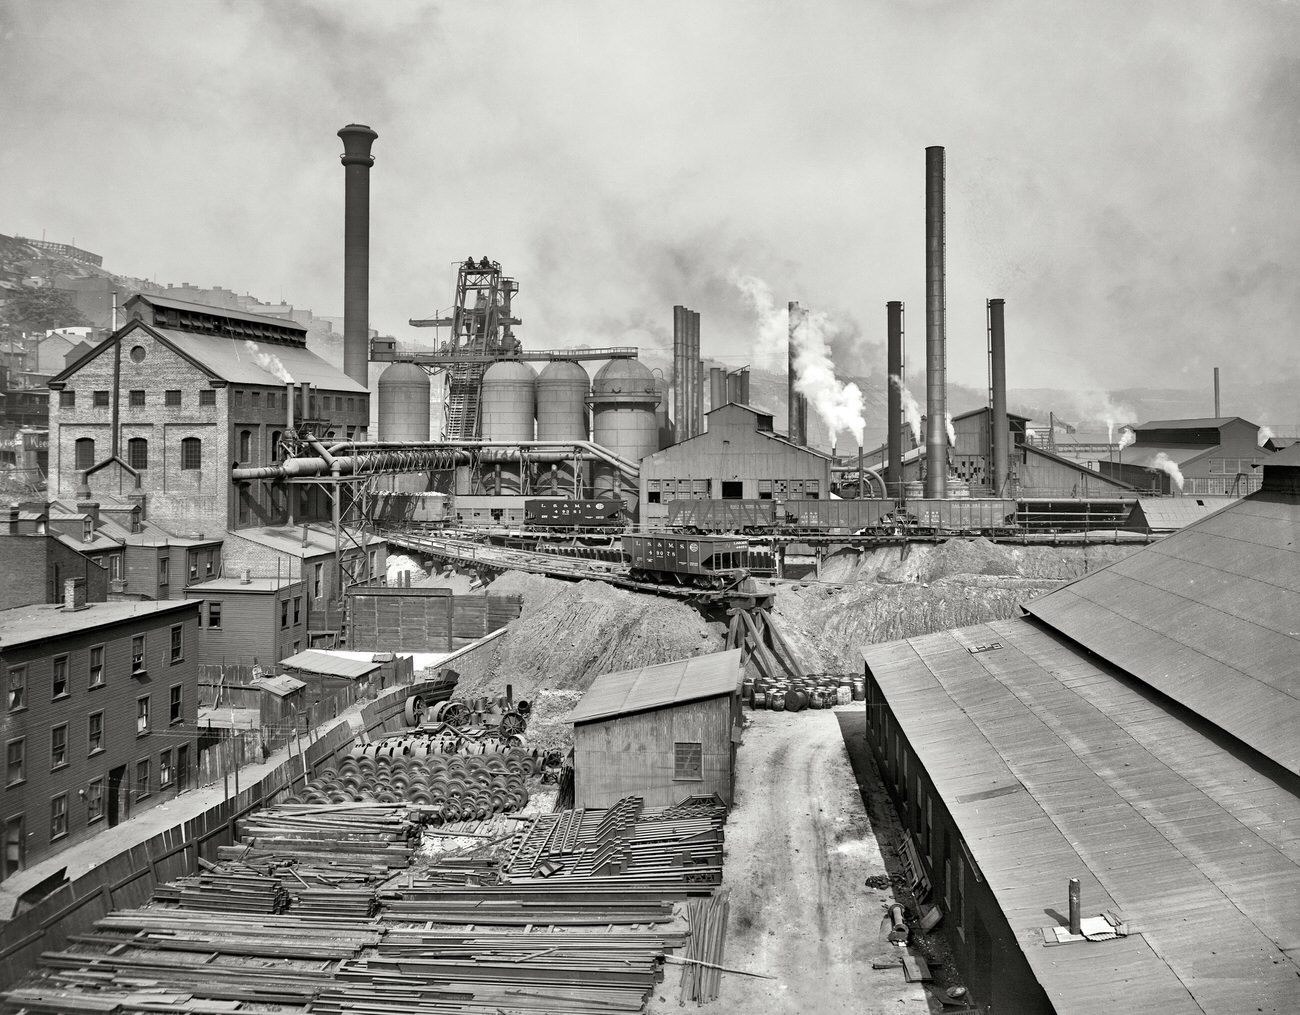 Furnaces at National Tube Works, Pittsburgh, Pennsylvania, 1910